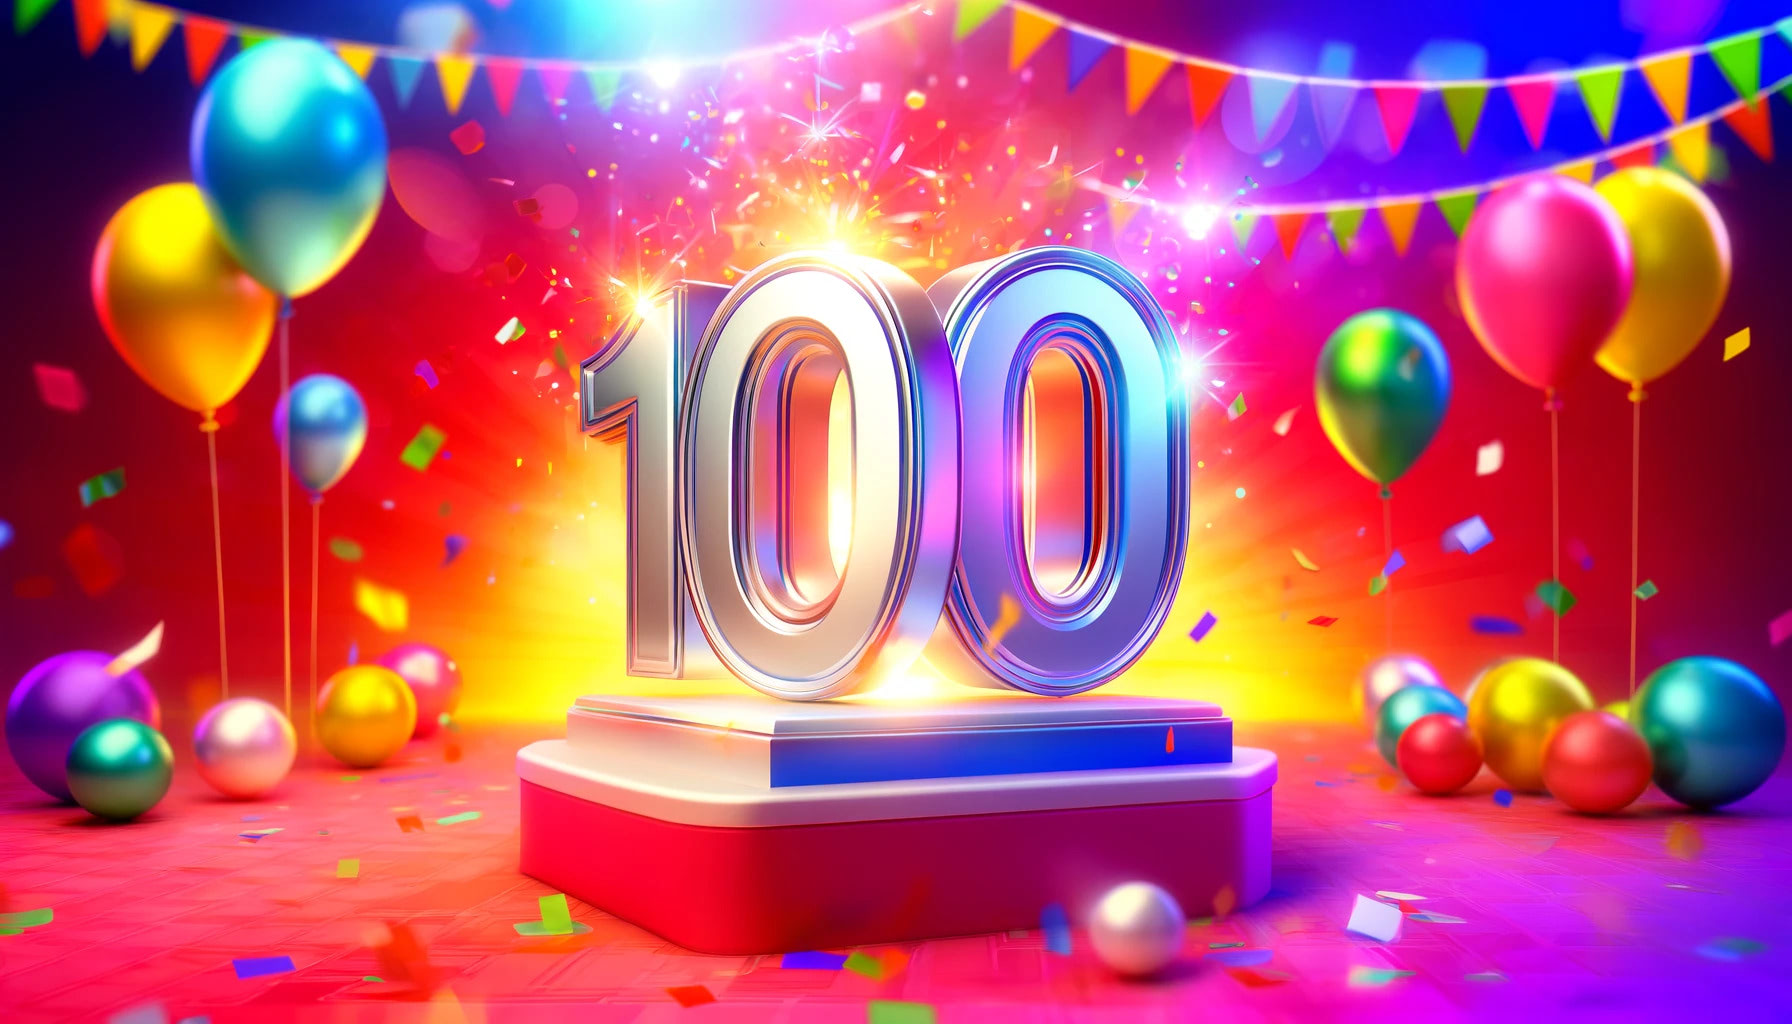 Vibrant celebration scene with a large, shiny '100' in 3D at the center, surrounded by colorful confetti and balloons, symbolizing a significant achievement with a festive and joyful atmosphere.